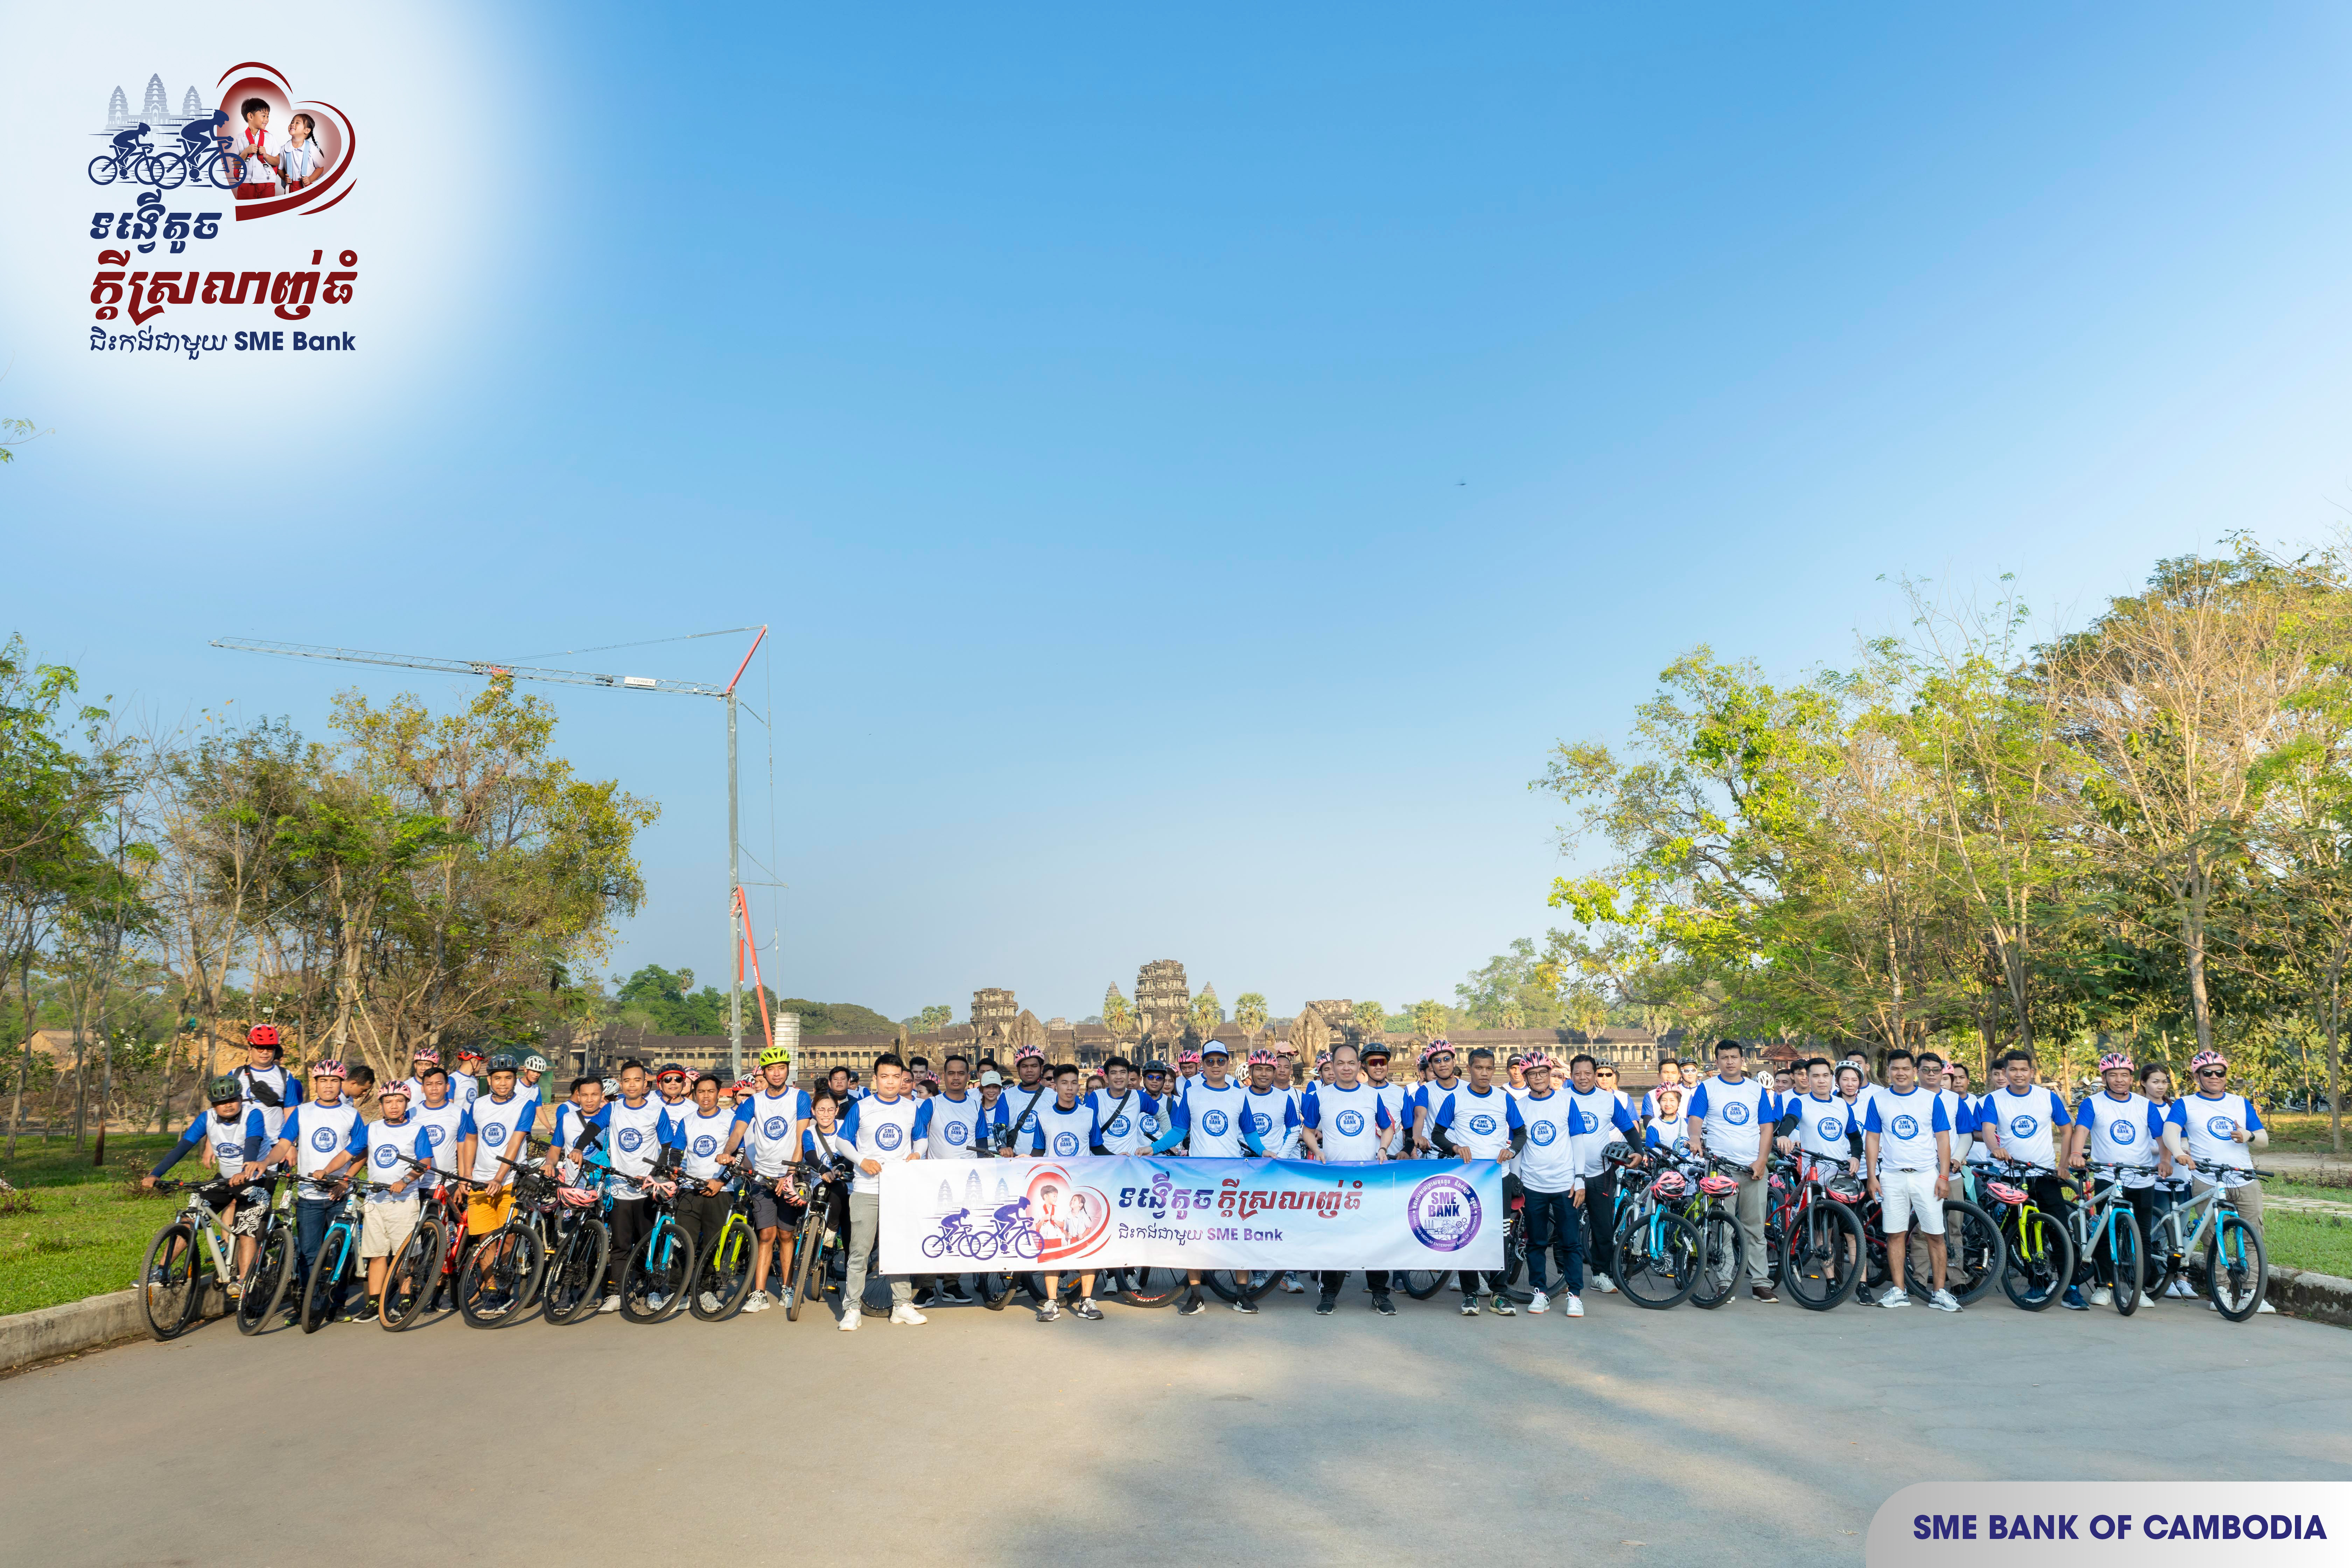 SME Bank of Cambodia organized a Team Building and CSR event under the theme: “Small Wheels, Big Heart – Cycling with SME Bank,”